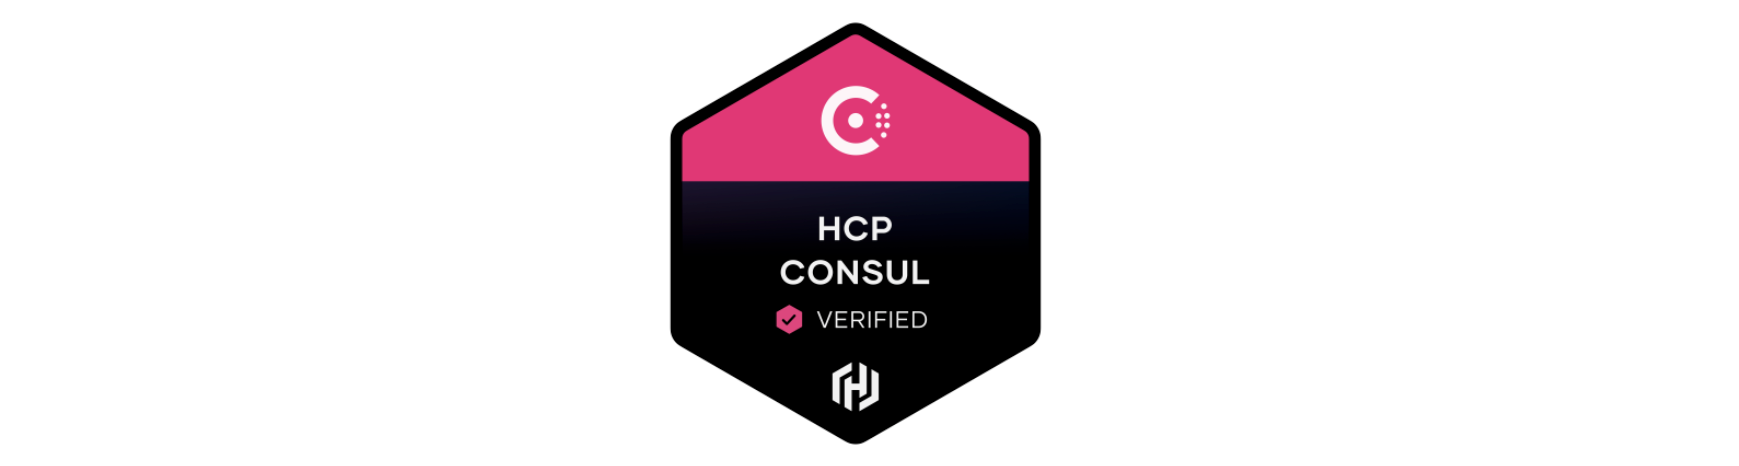 The HCP Consul Verified badge indicates a product has been verified to work with HCP Consul.